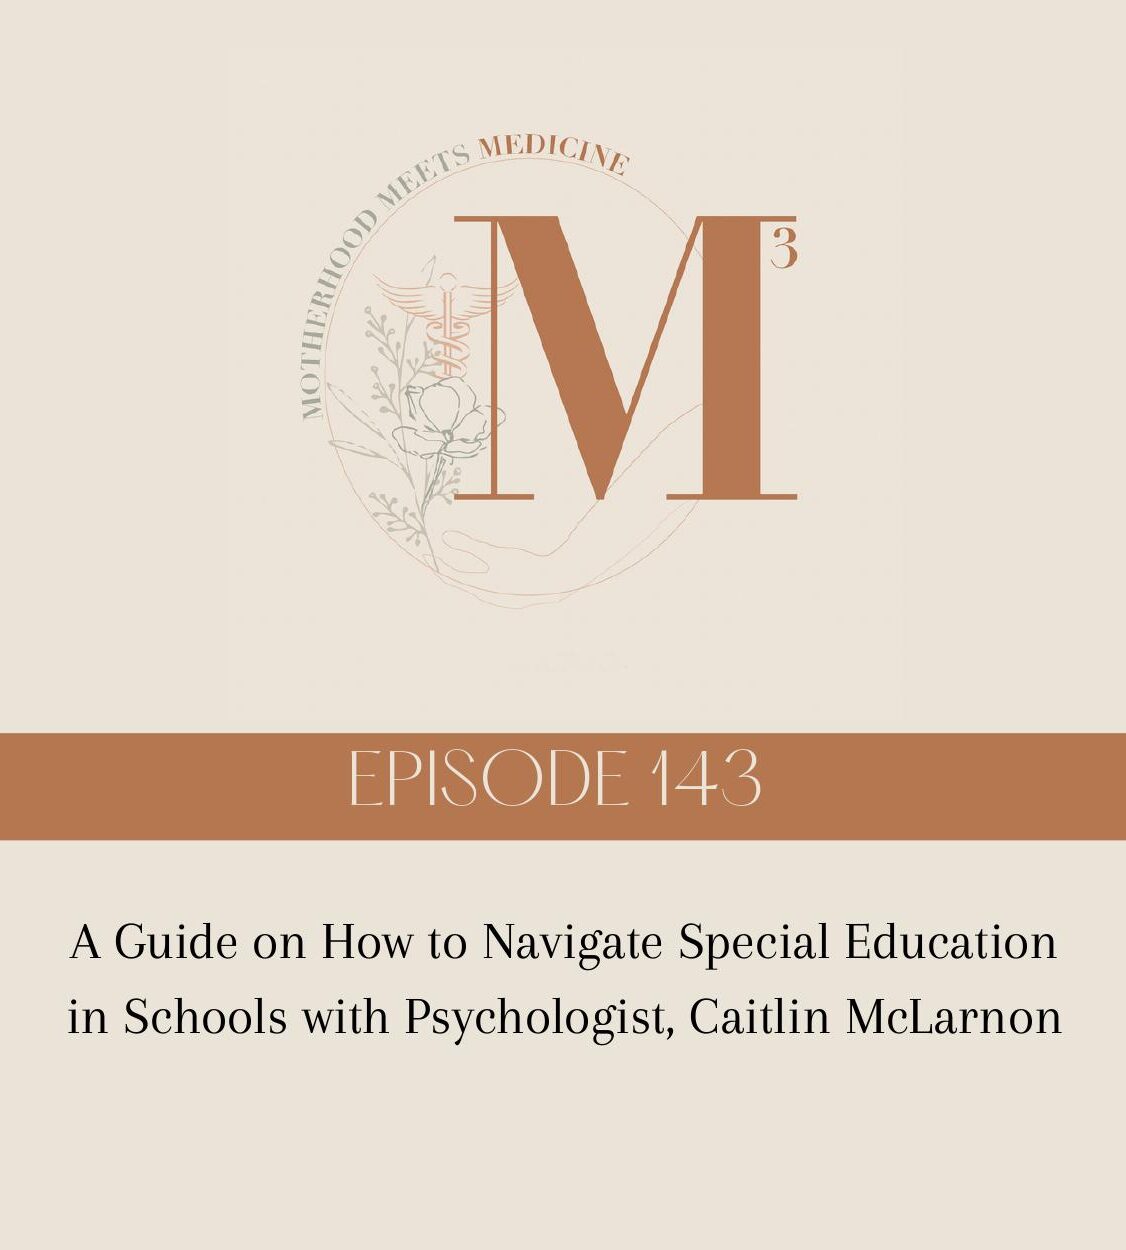 Episode 143: A Guide on How to Navigate Special Education in Schools with Psychologist, Caitlin McLarnon